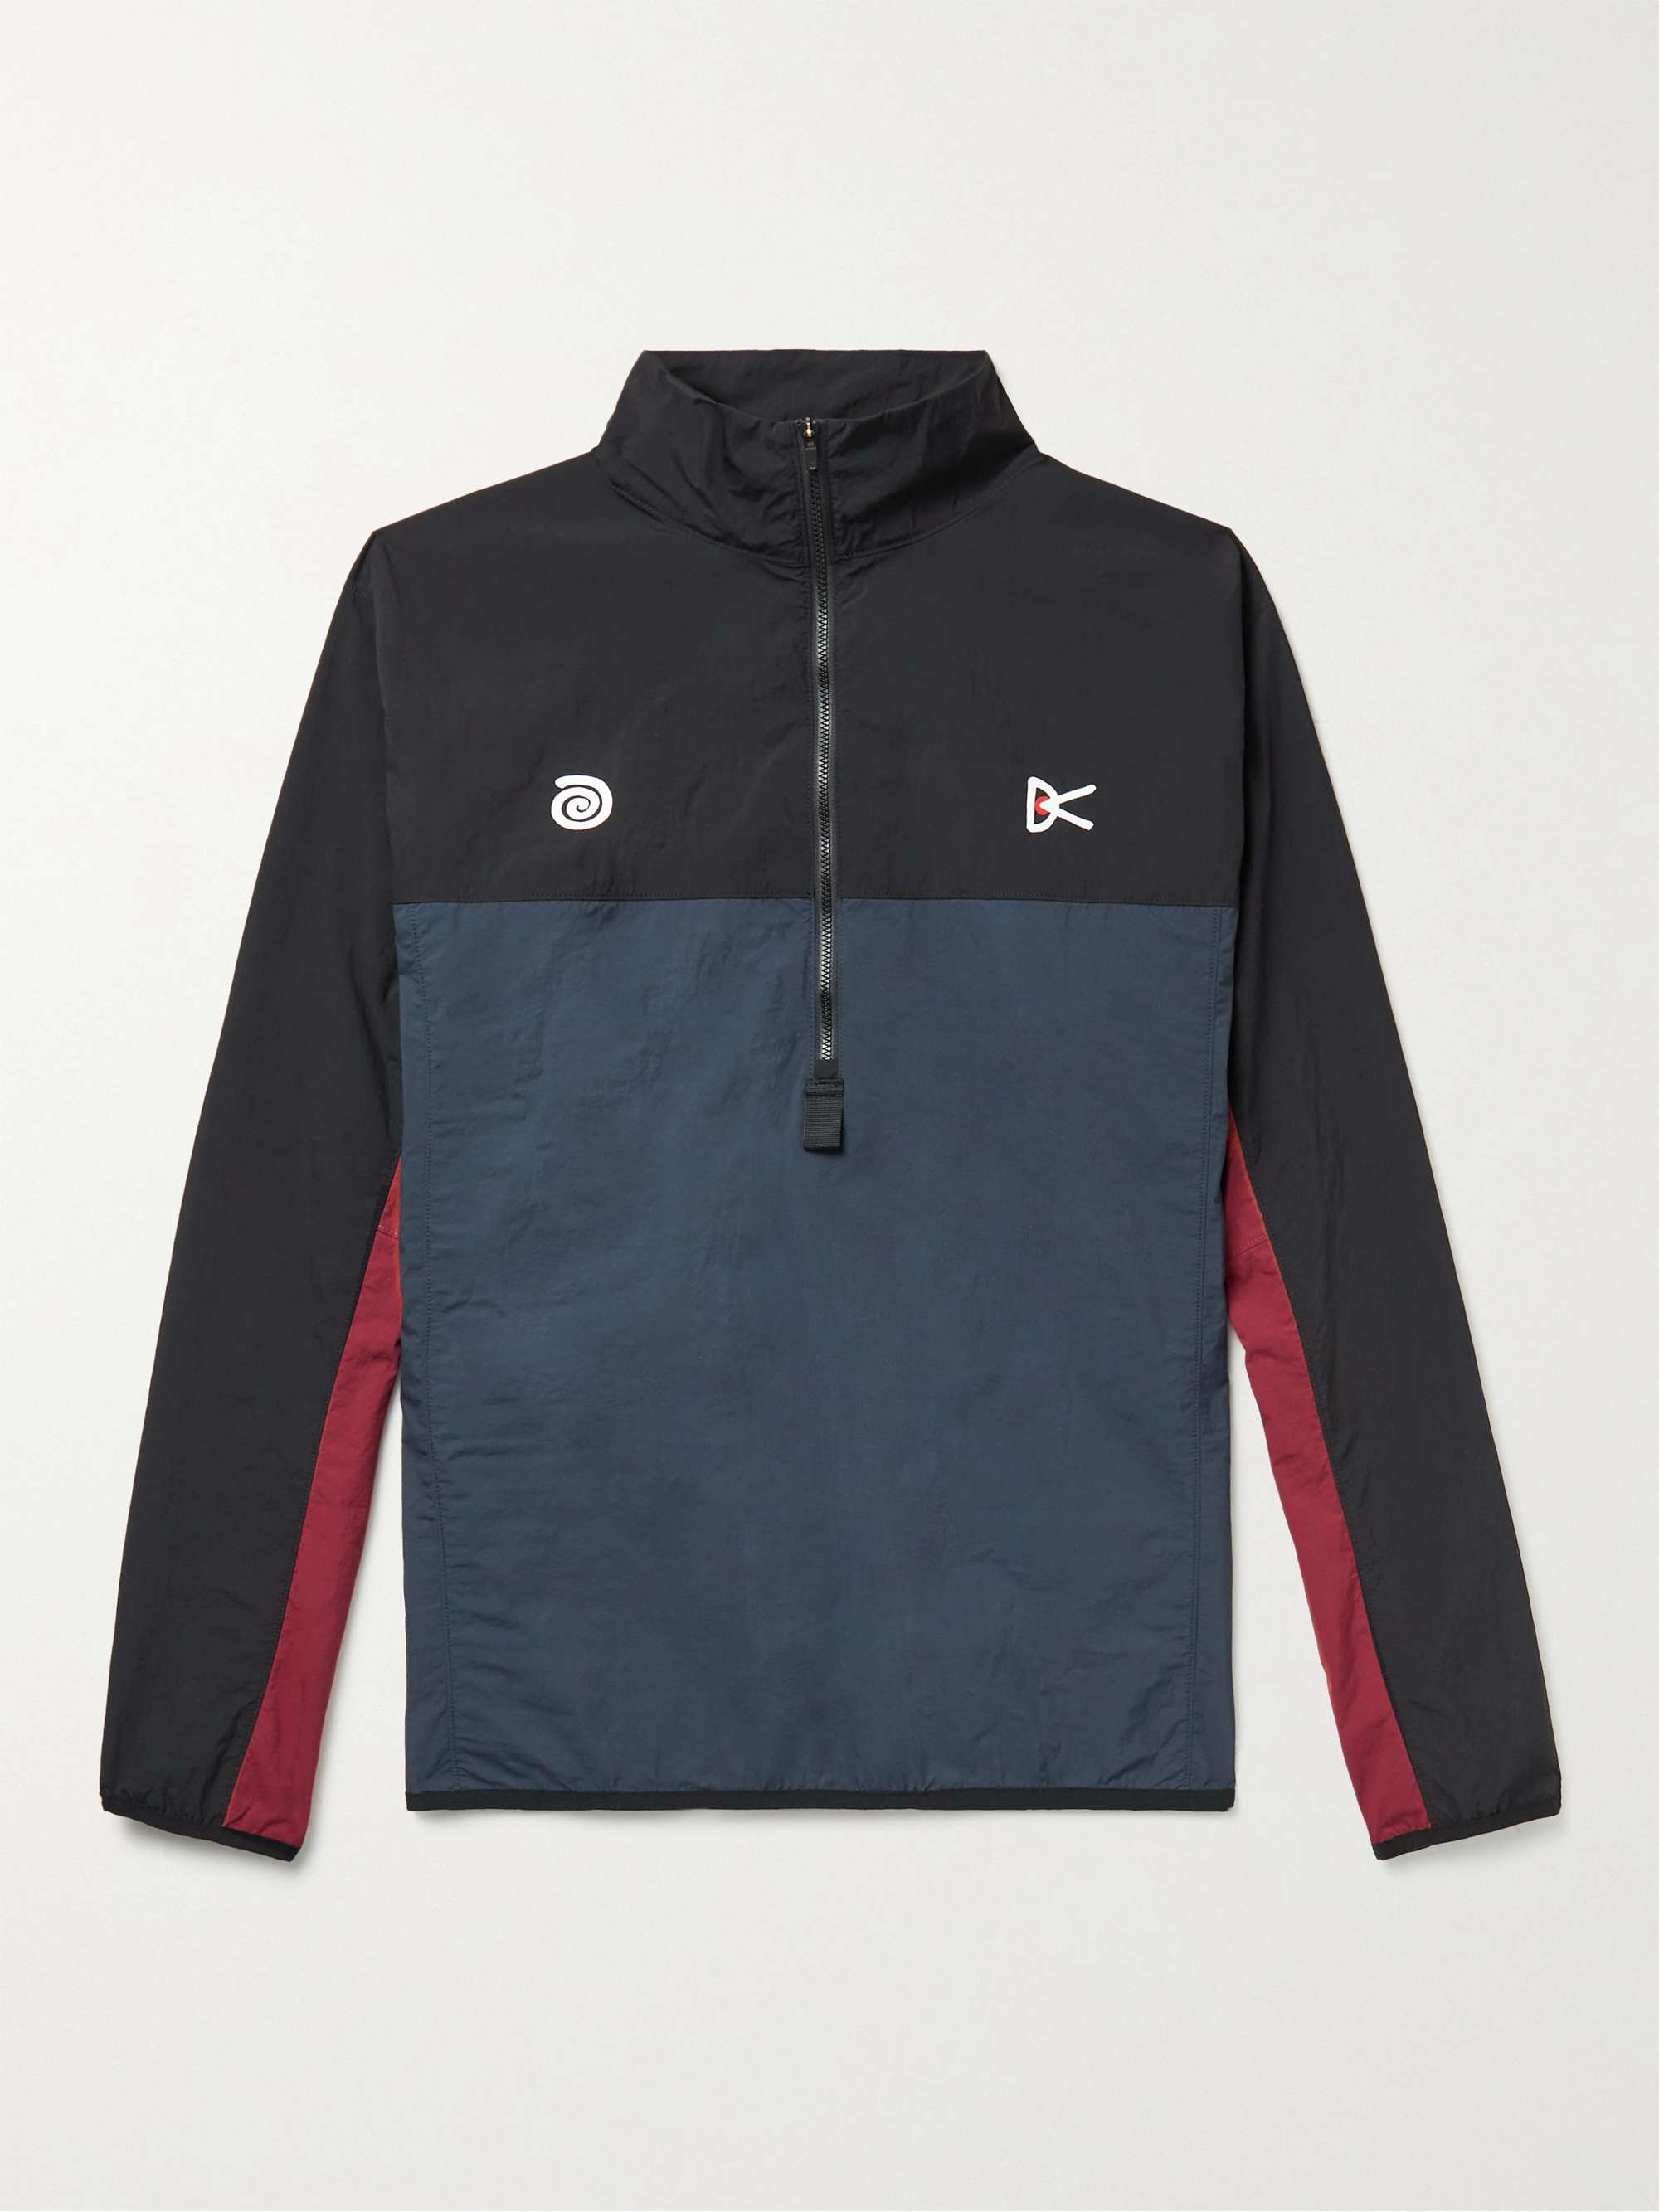 DISTRICT VISION Theo Shell Half-Zip Jacket